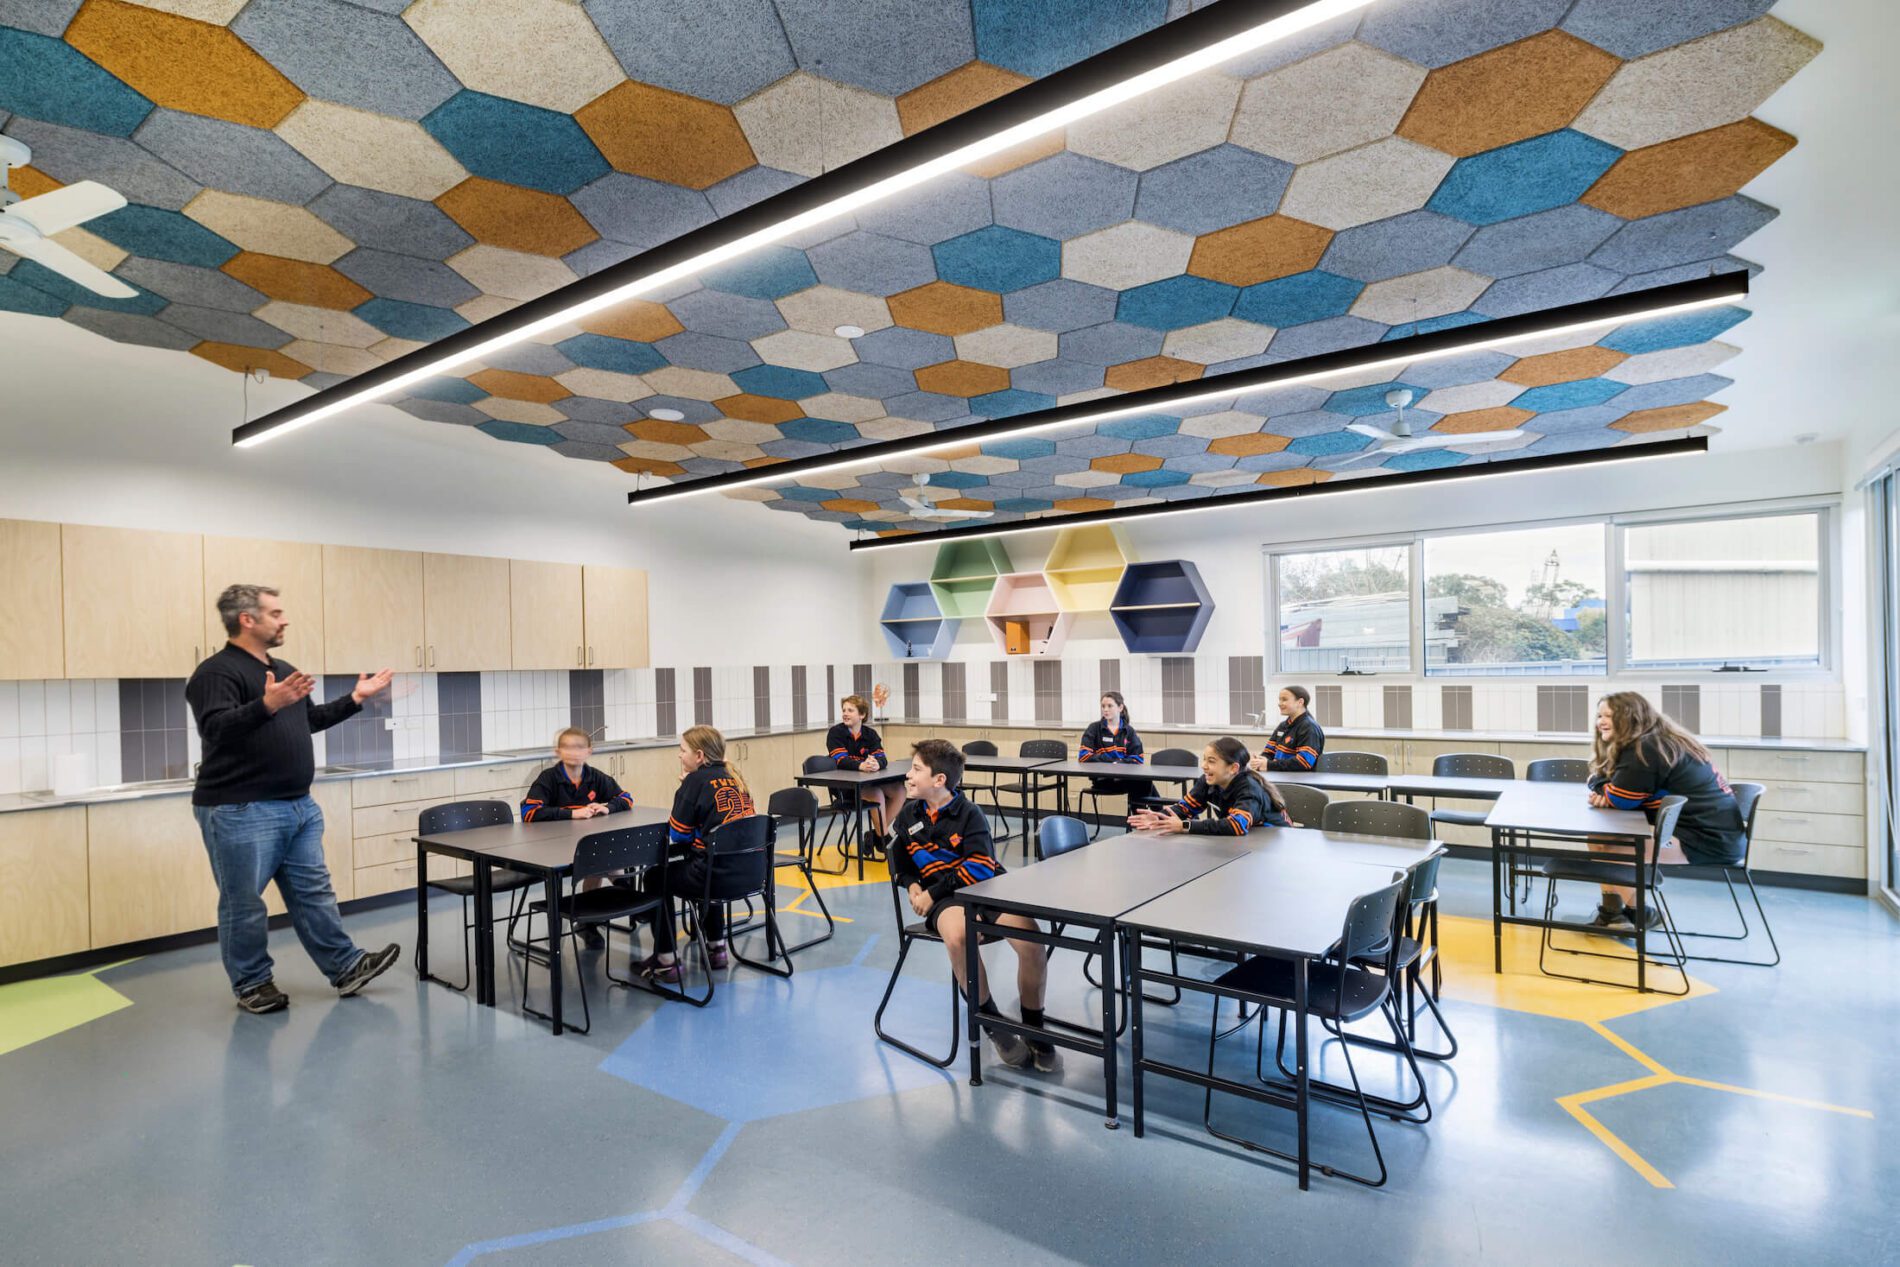 Students smiling, listening to teacher in science laboratory with honeycomb acoustic panel ceiling